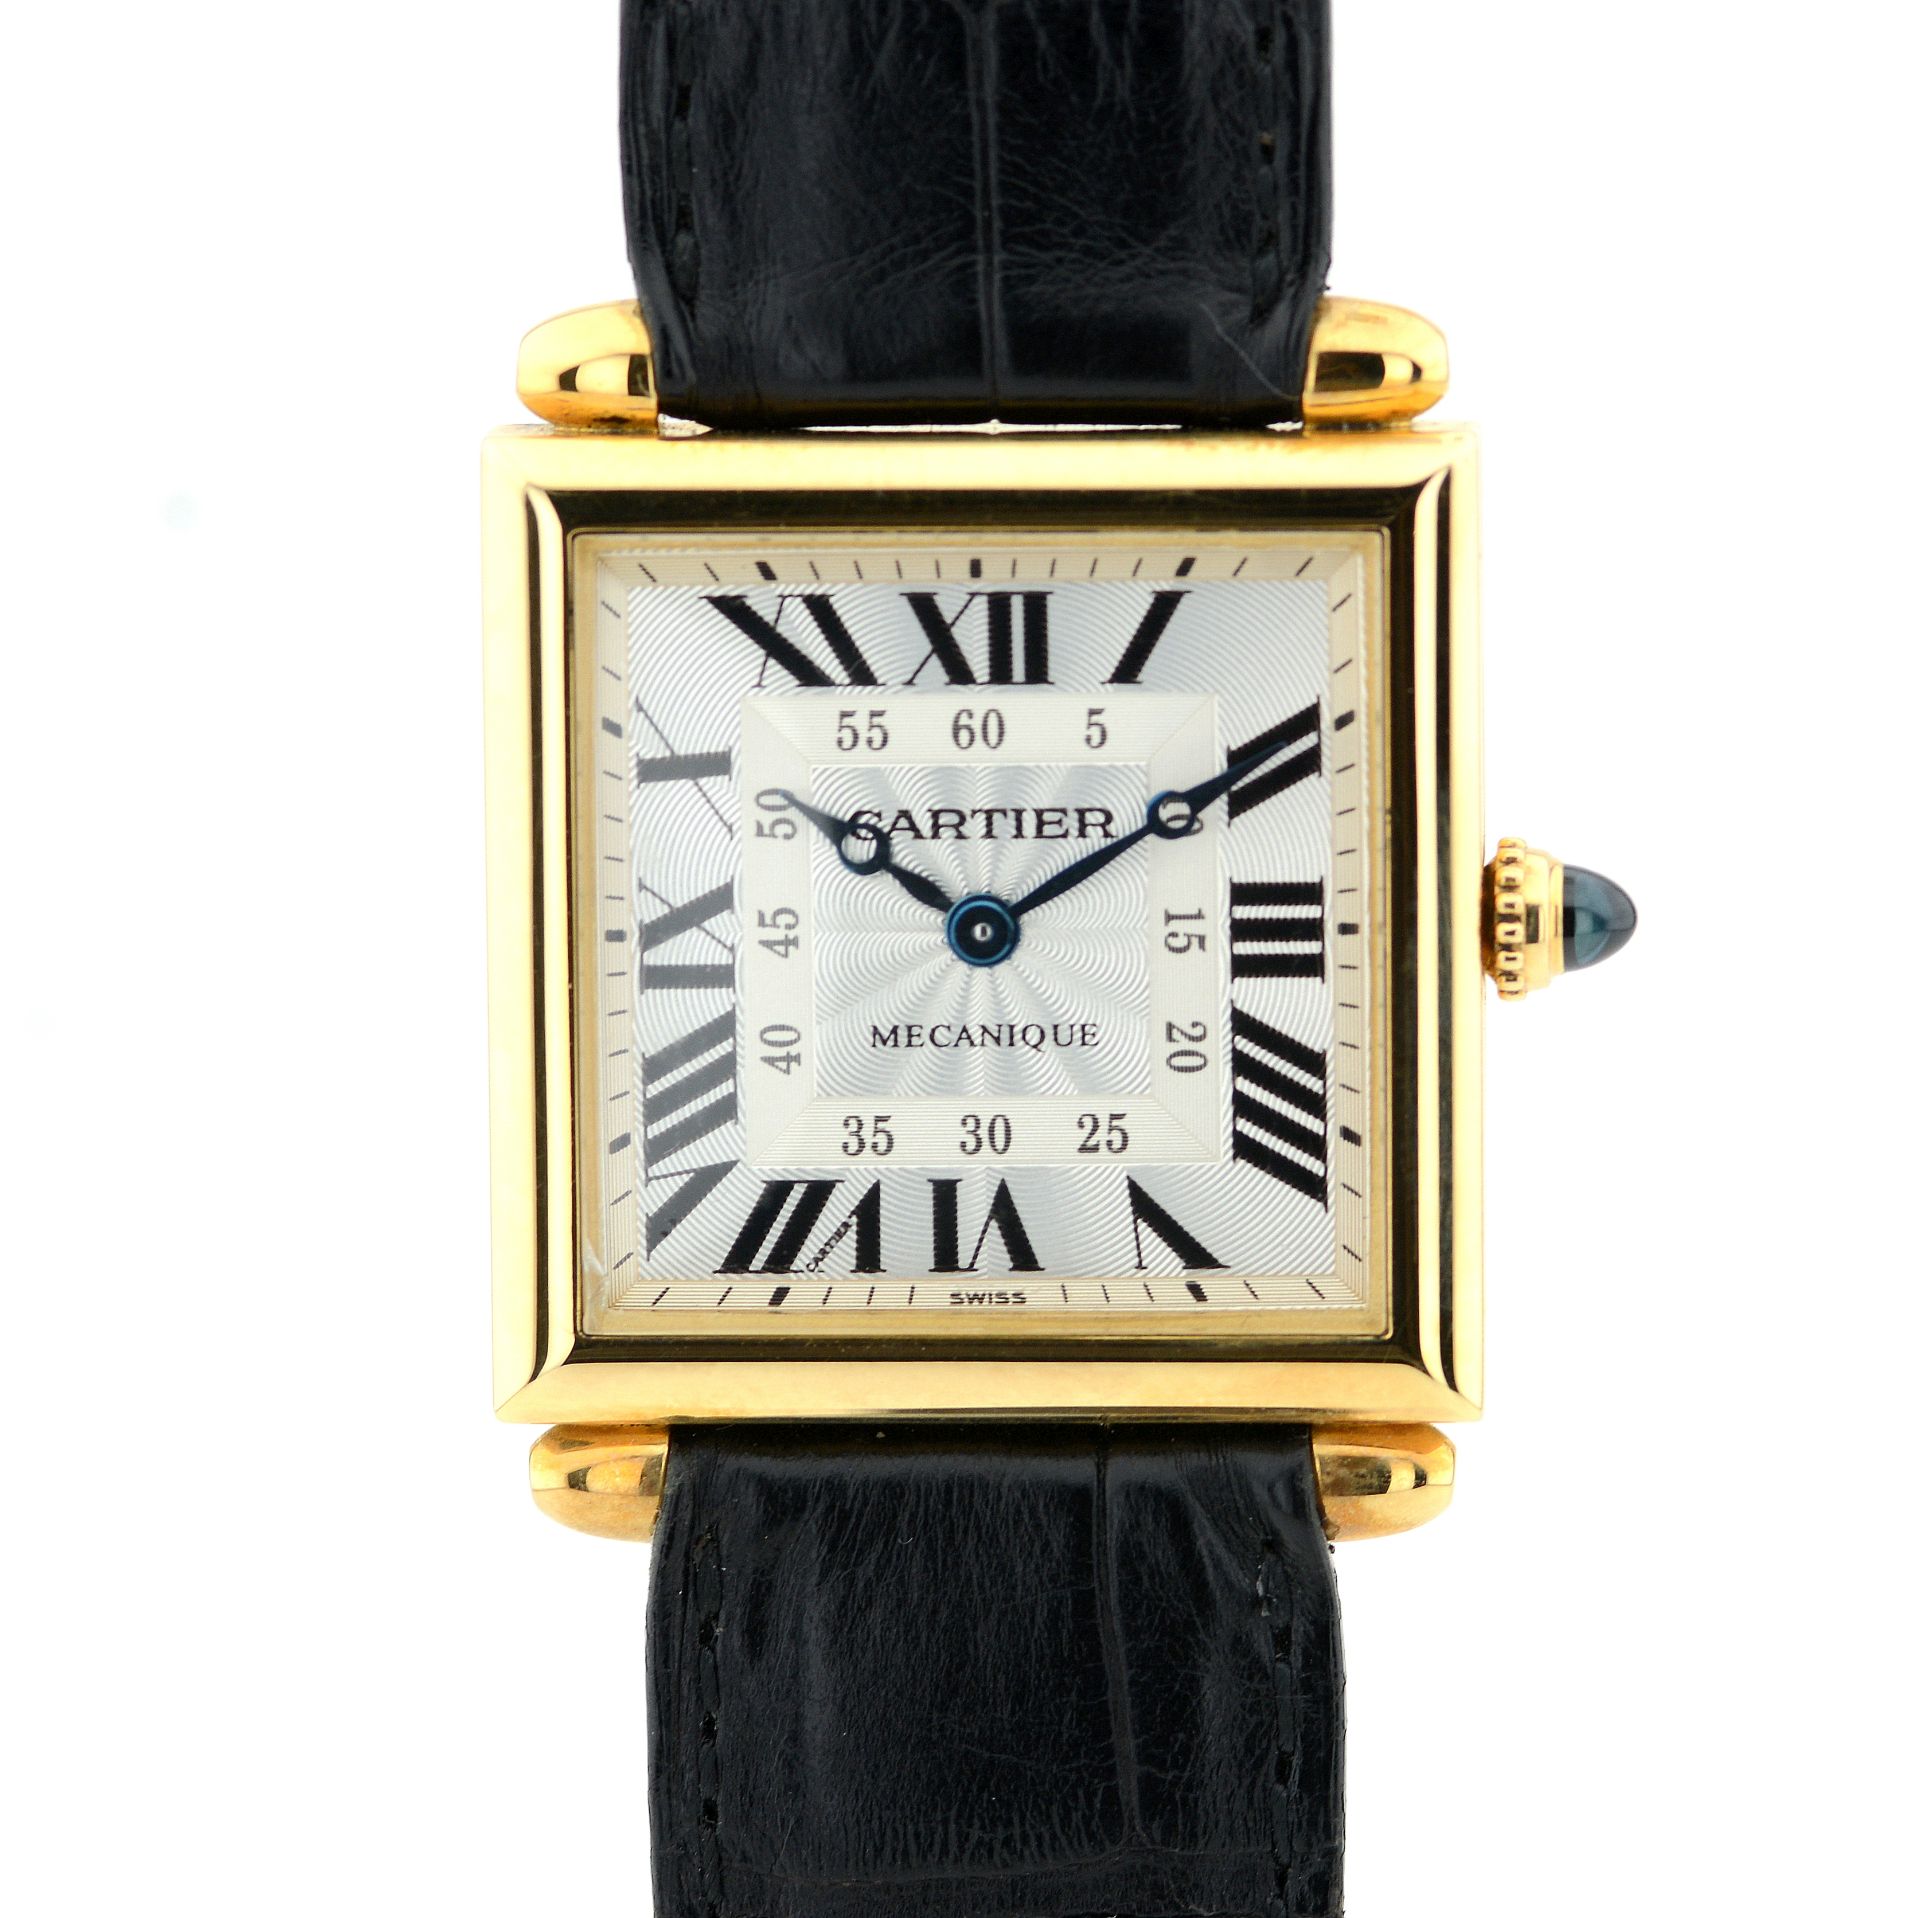 Cartier / Cartier Tank Obus Yellow Gold CPCP Mechanique - Unisex Yellow gold Wrist Watch - Image 8 of 11